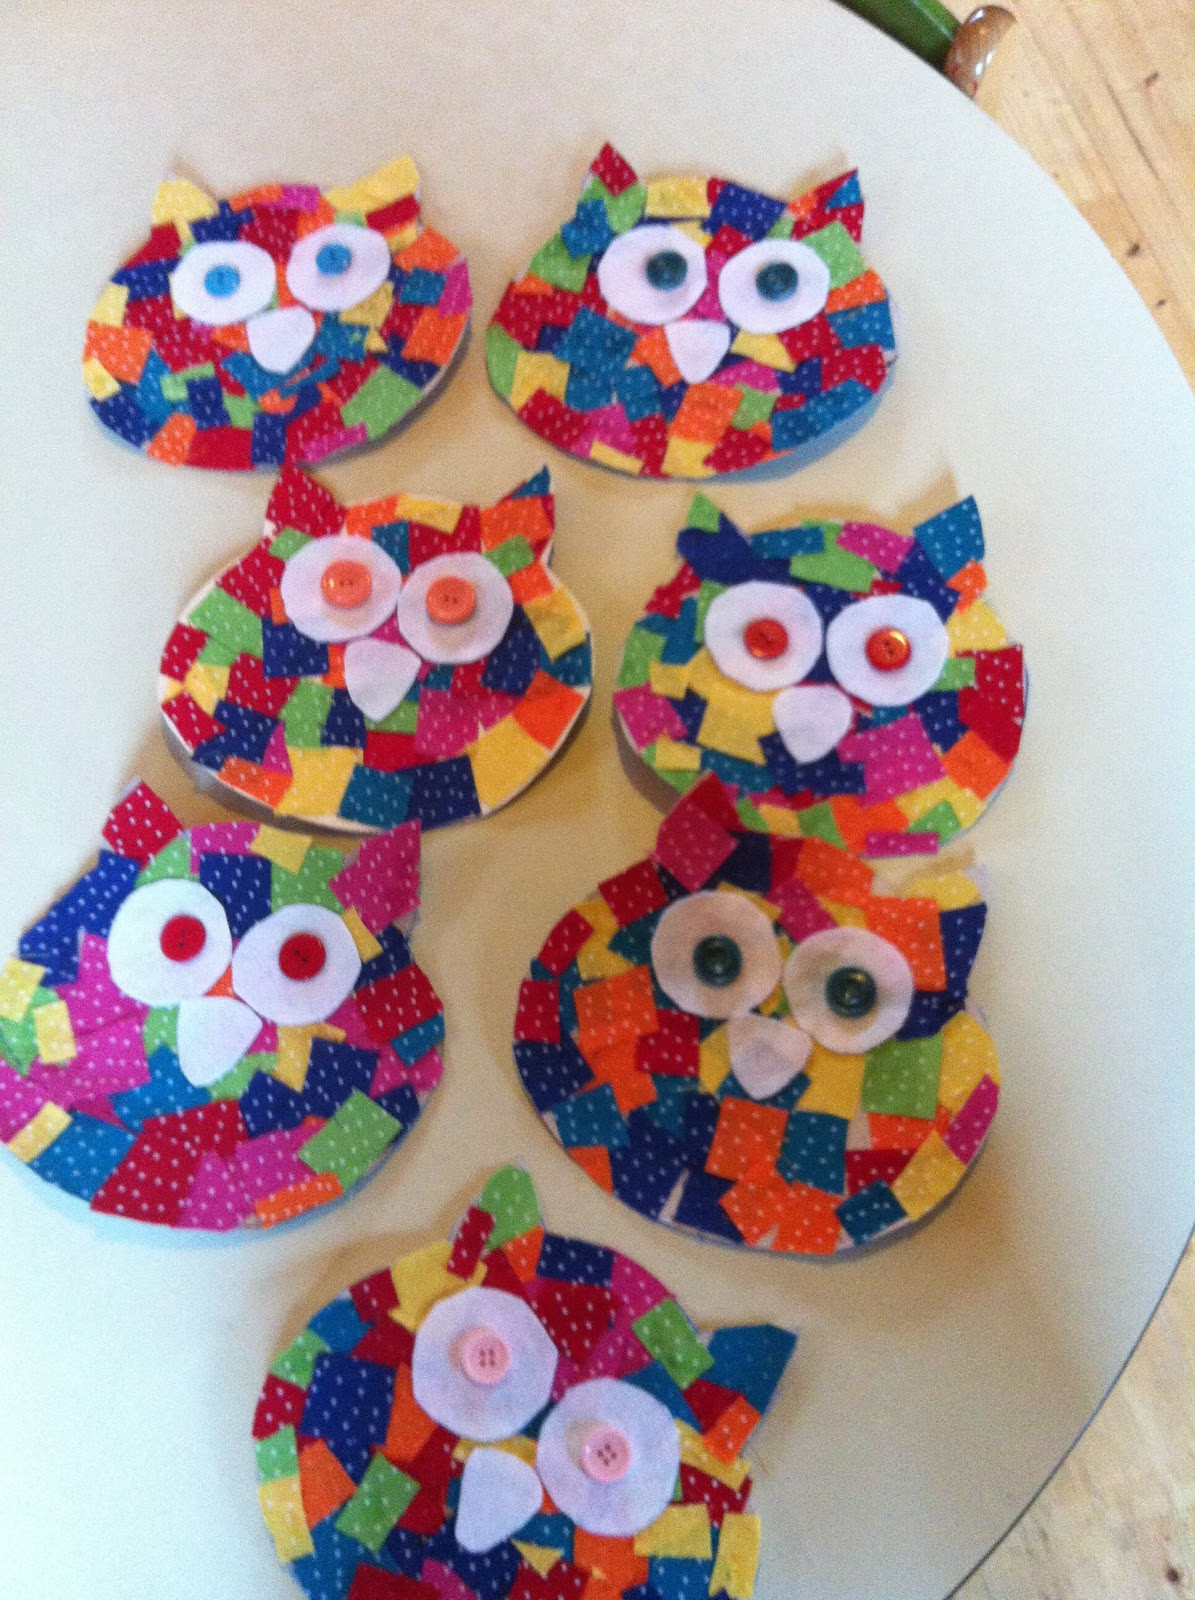 Preschool Arts And Crafts Ideas
 The Guilletos Playful Learning Cute little owls